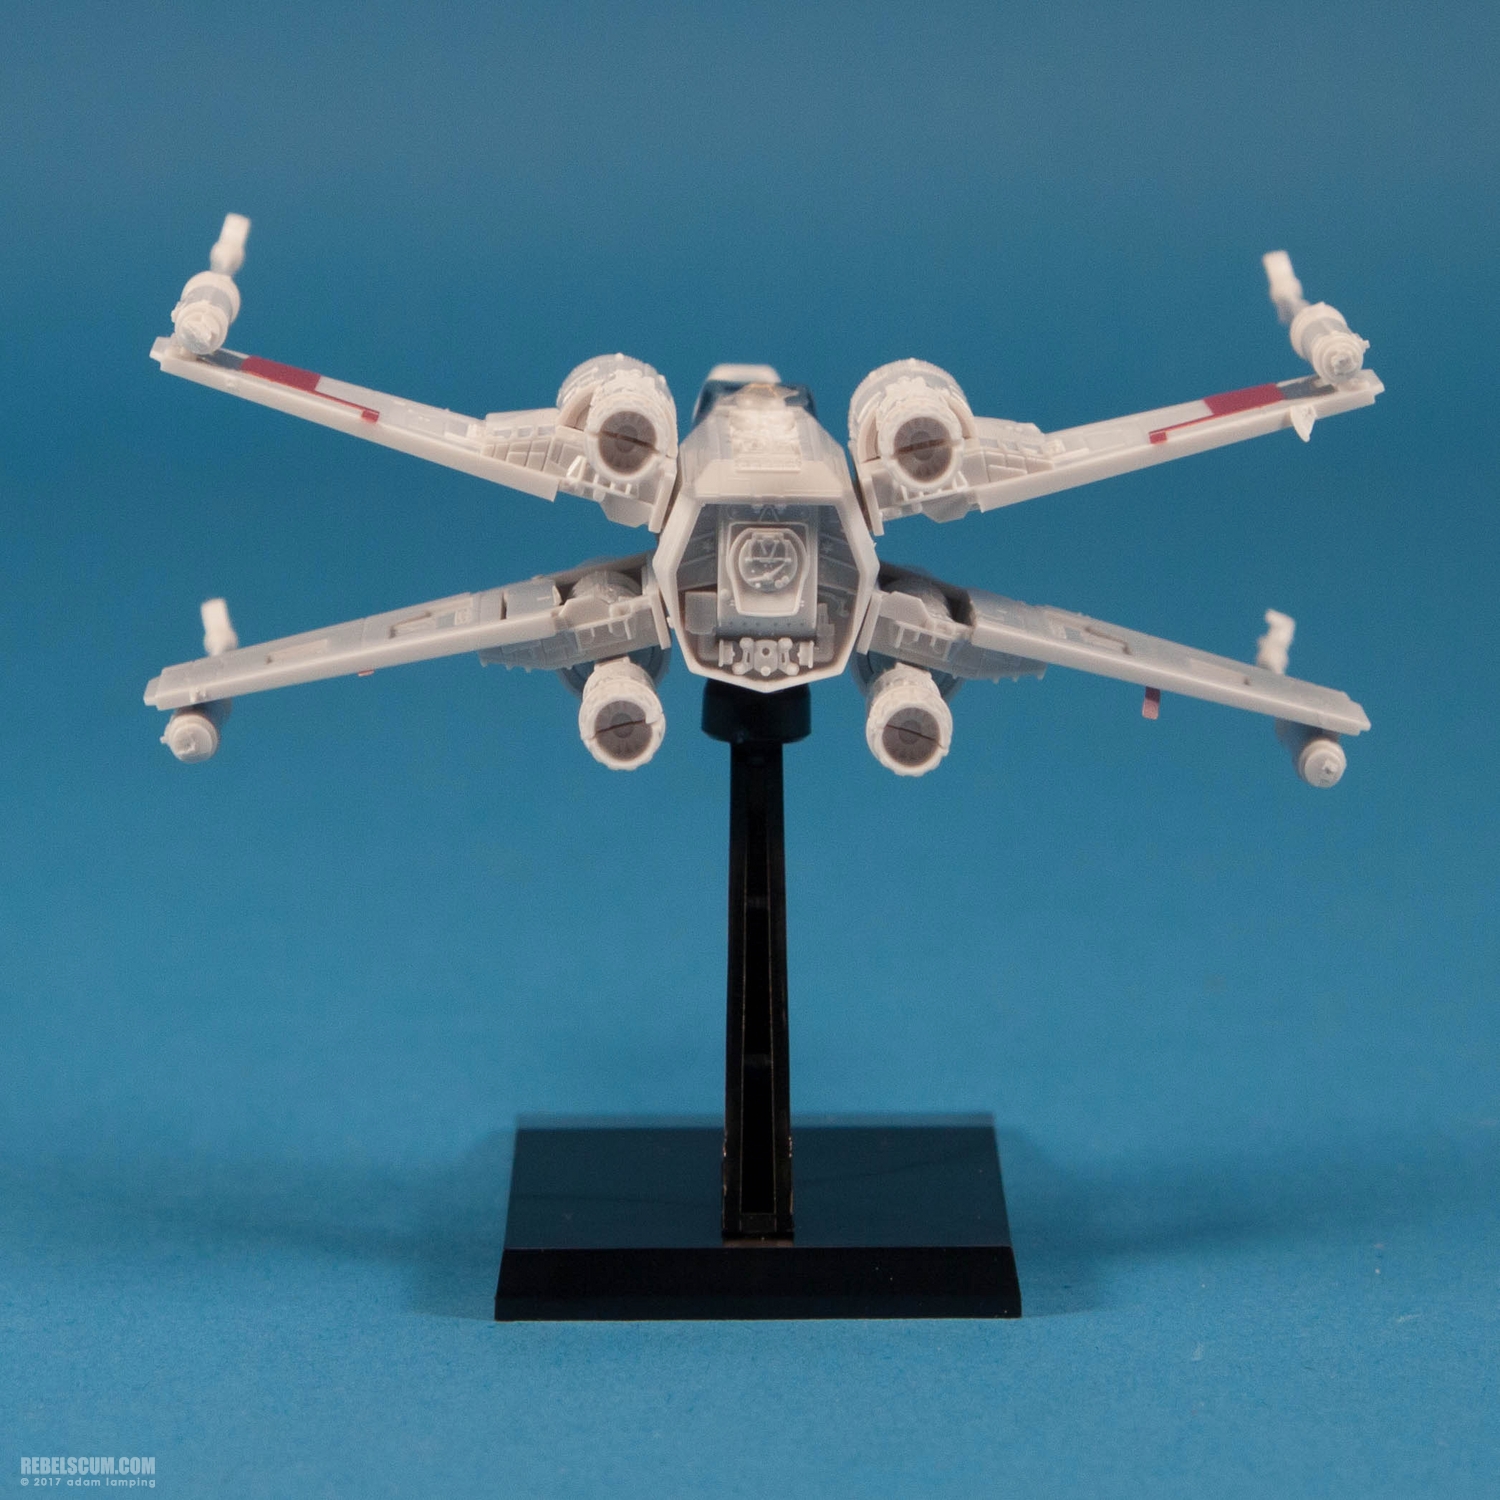 bandai-red-squadron-x-wing-starfighter-scale-model-kit-016.jpg